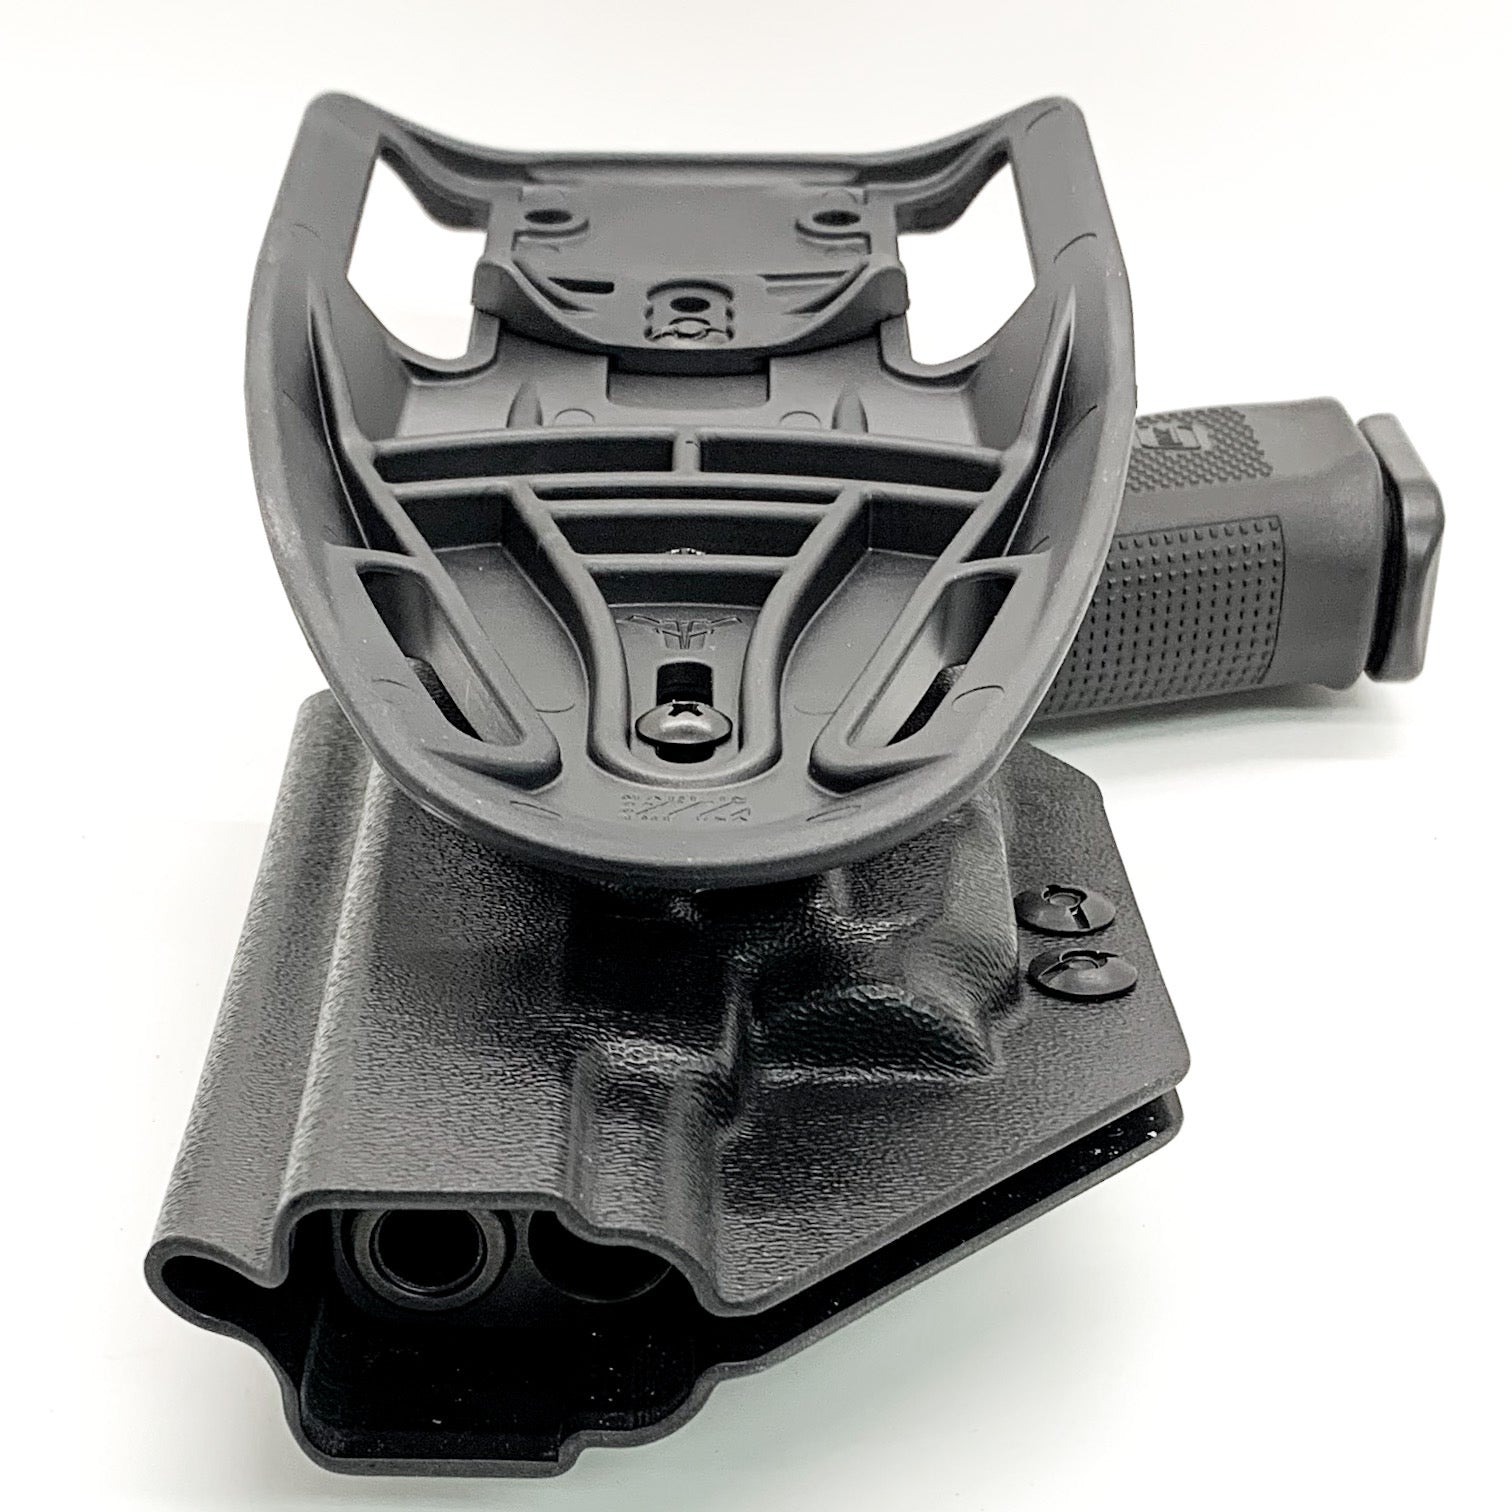 For the best outside waistband OWB duty & competition holster for the Glock 34 Gen 5 with the Streamlight TLR-7, TLR-7A or TLR-7 X light mounted on the firearm, shop Four Brothers Holsters.  The holster is cleared for a red dot sight. Adjustable Retention, molded with .080" Kydex.  Proudly made in the USA.